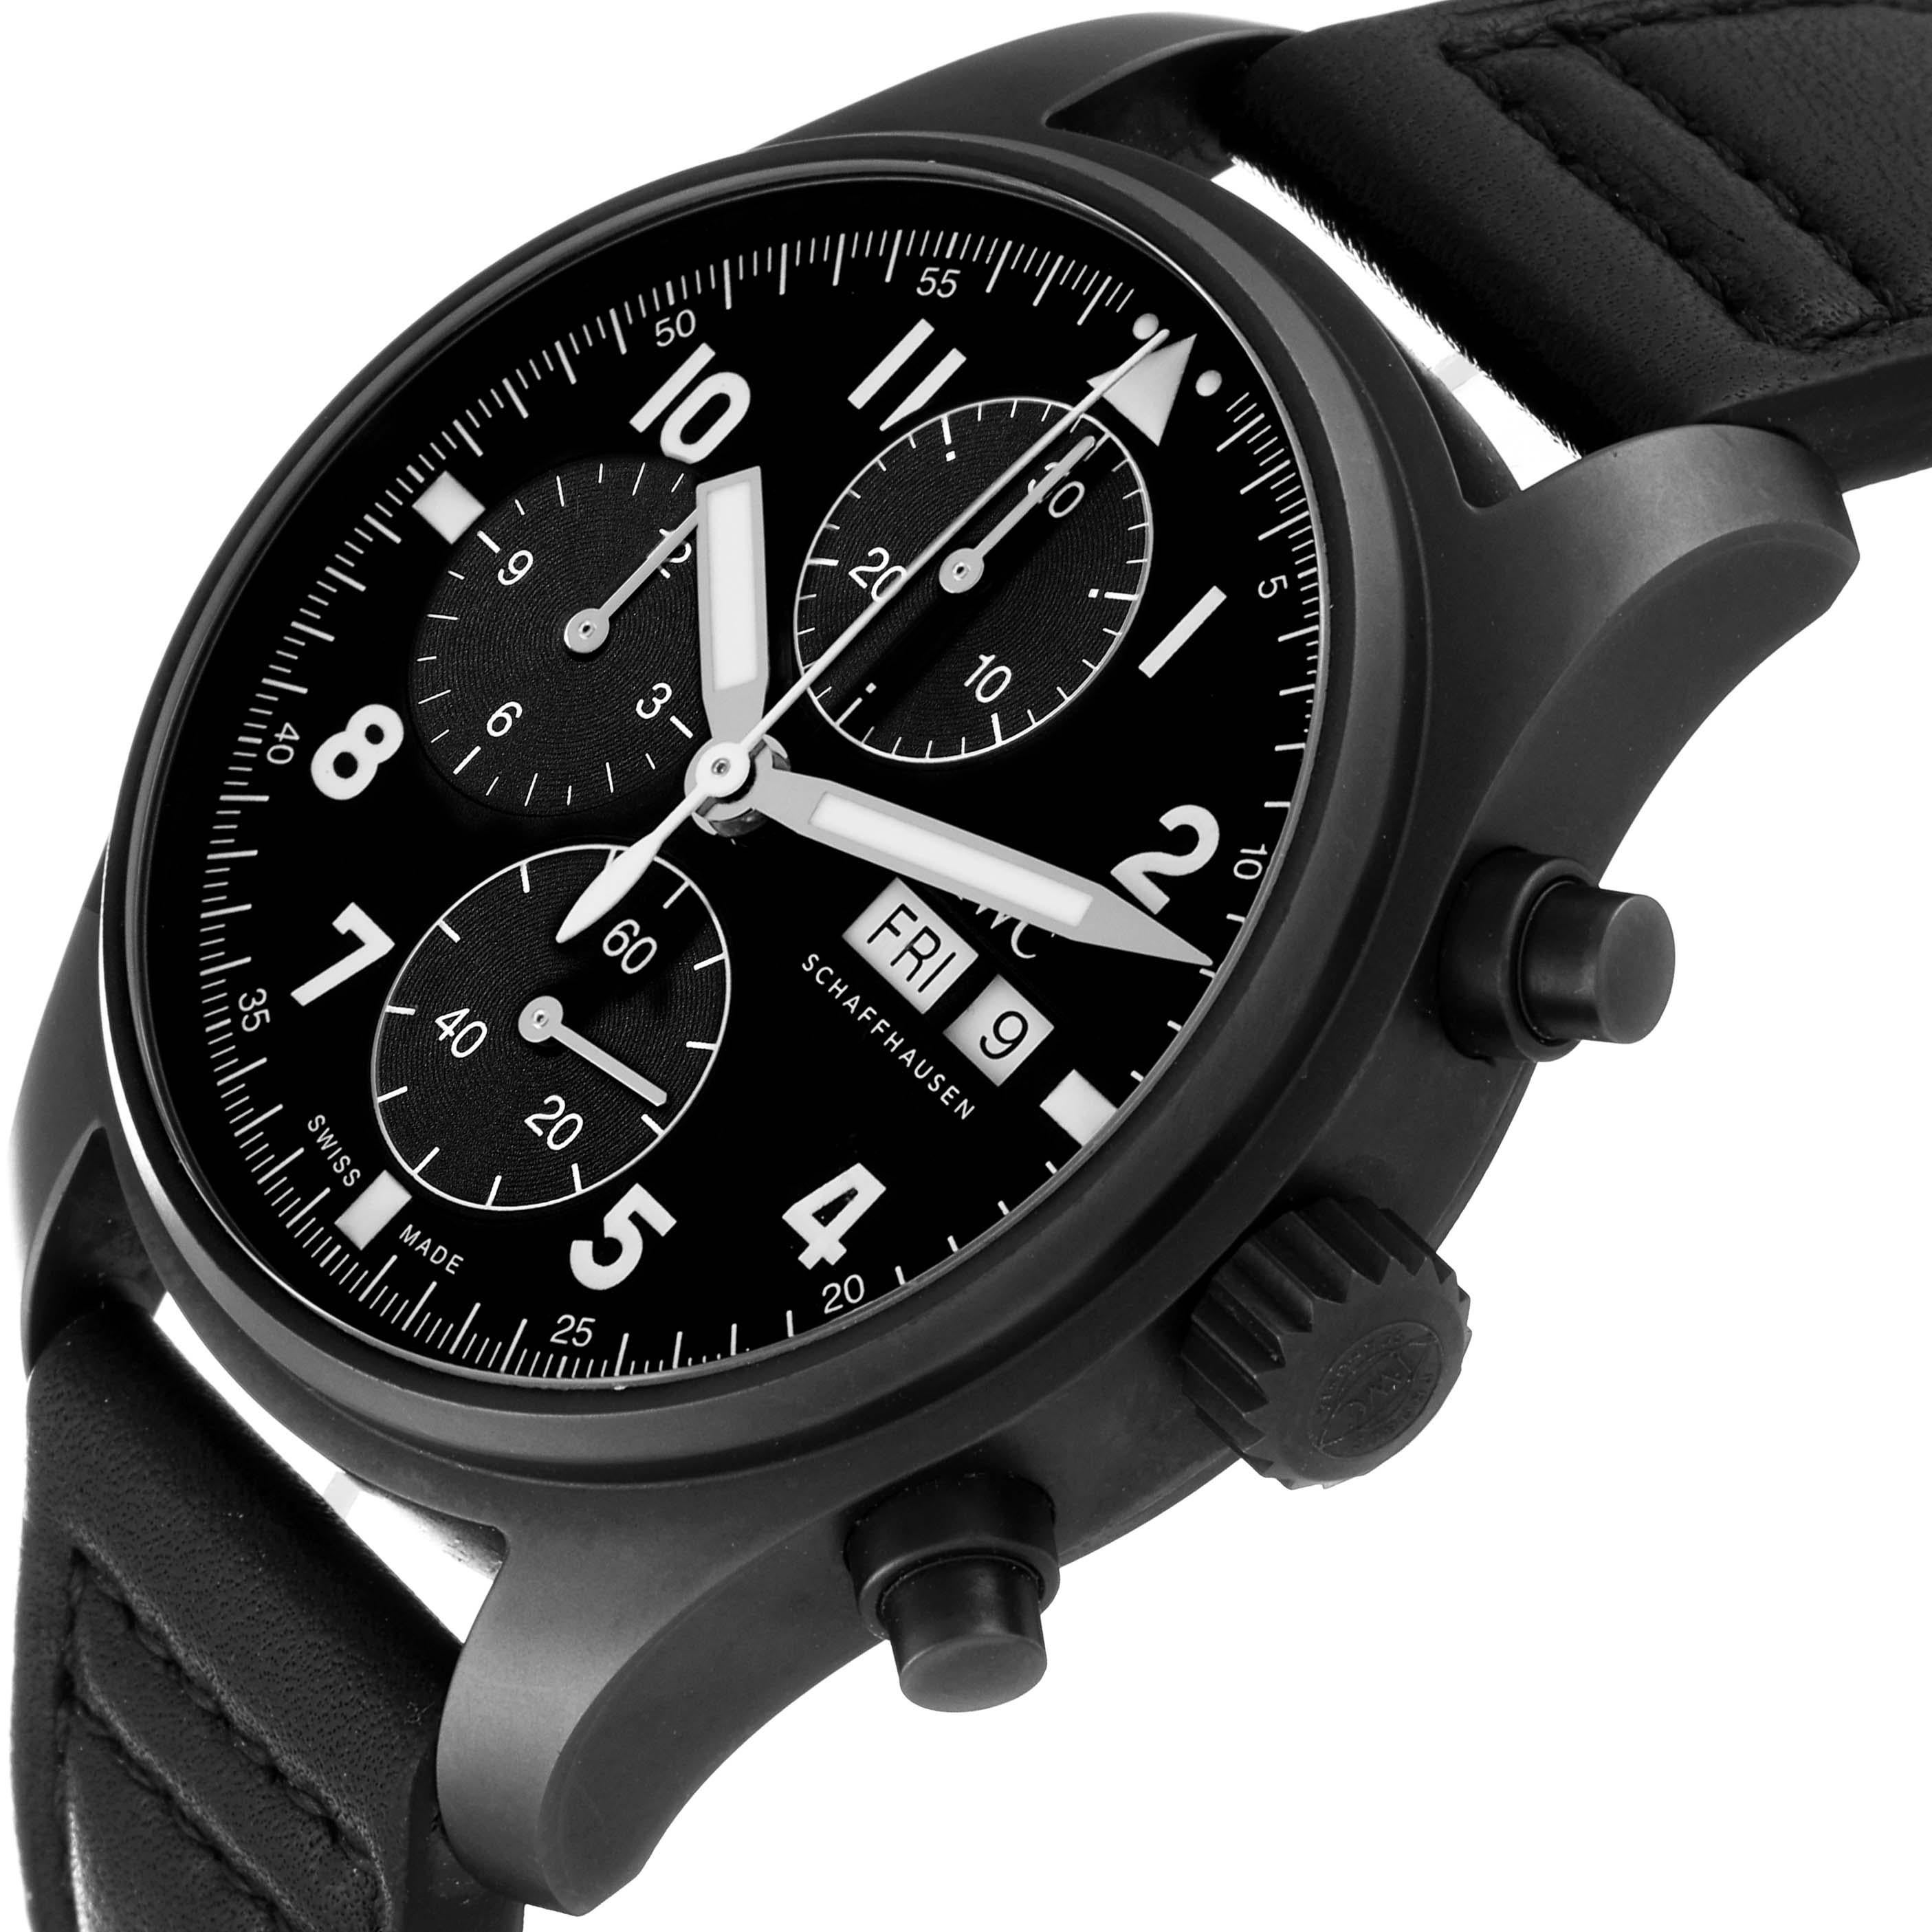 IWC Pilot Chronograph Tribute to 3705 Limited Edition Ceratanium Mens Watch IW387905 Box Card. Automatic self-winding chronograph movement. Ceratanium? case 41.0 mm in diameter. Ceratanium? bezel. Scratch resistant sapphire crystal. Black dial with